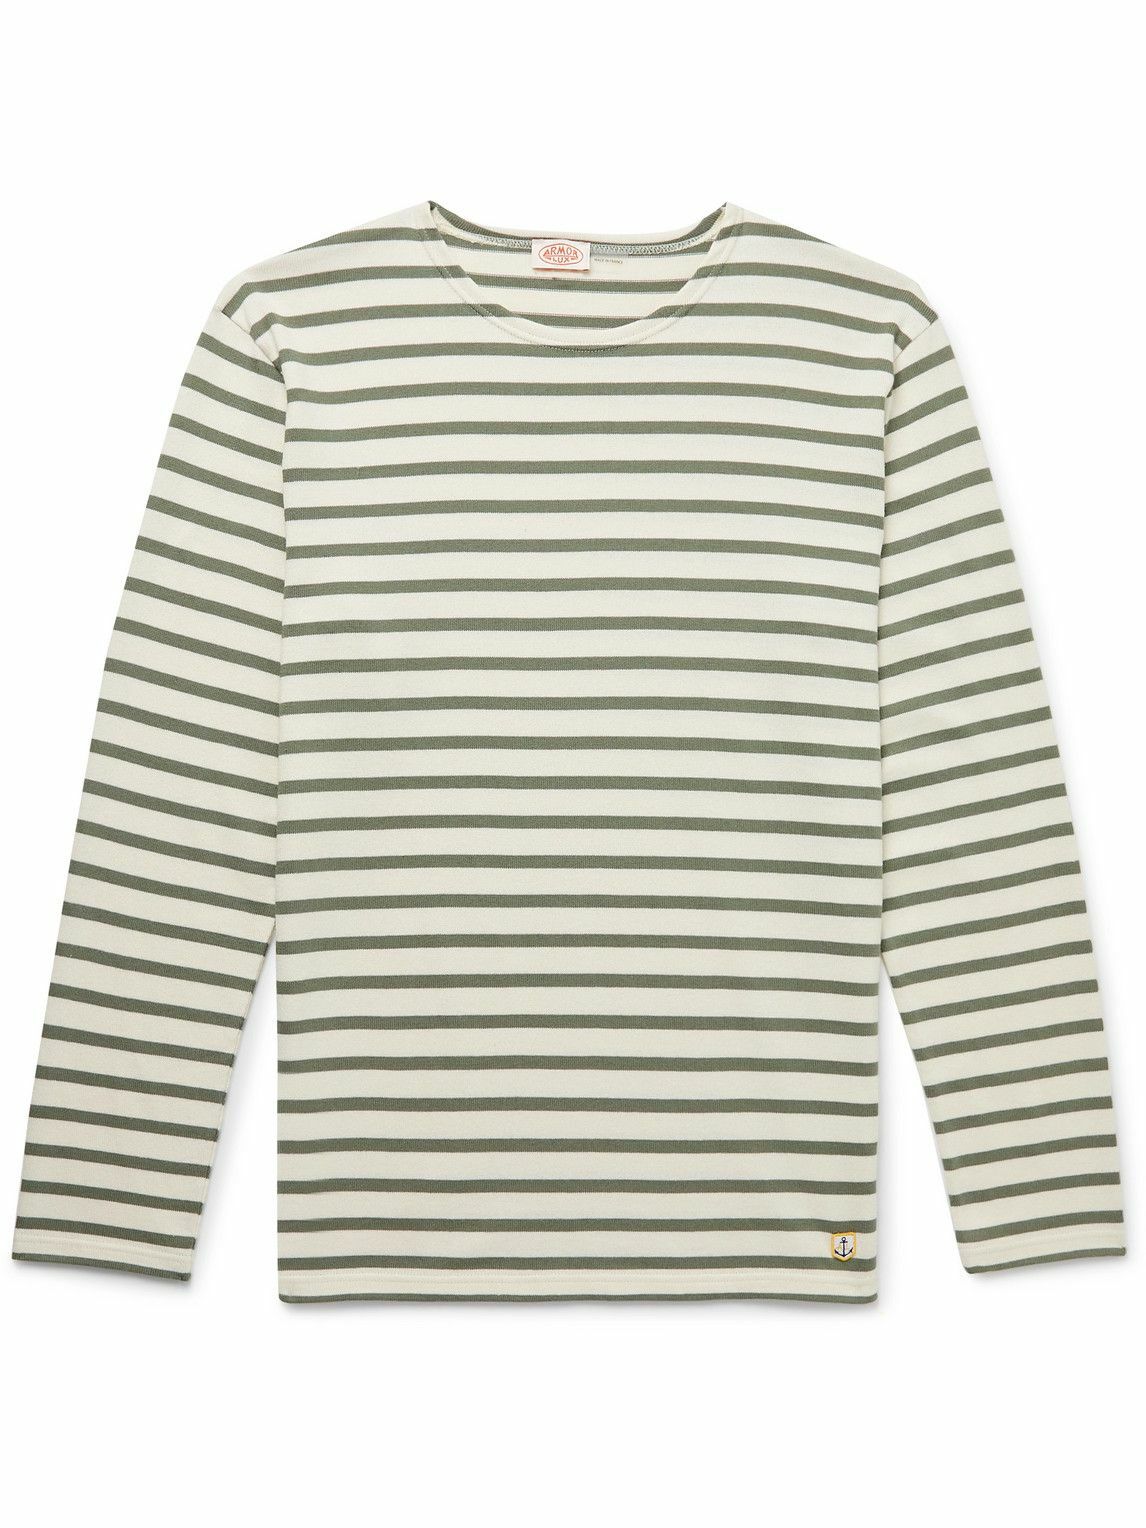 Photo: Armor Lux - Striped Cotton-Jersey T-Shirt - Green